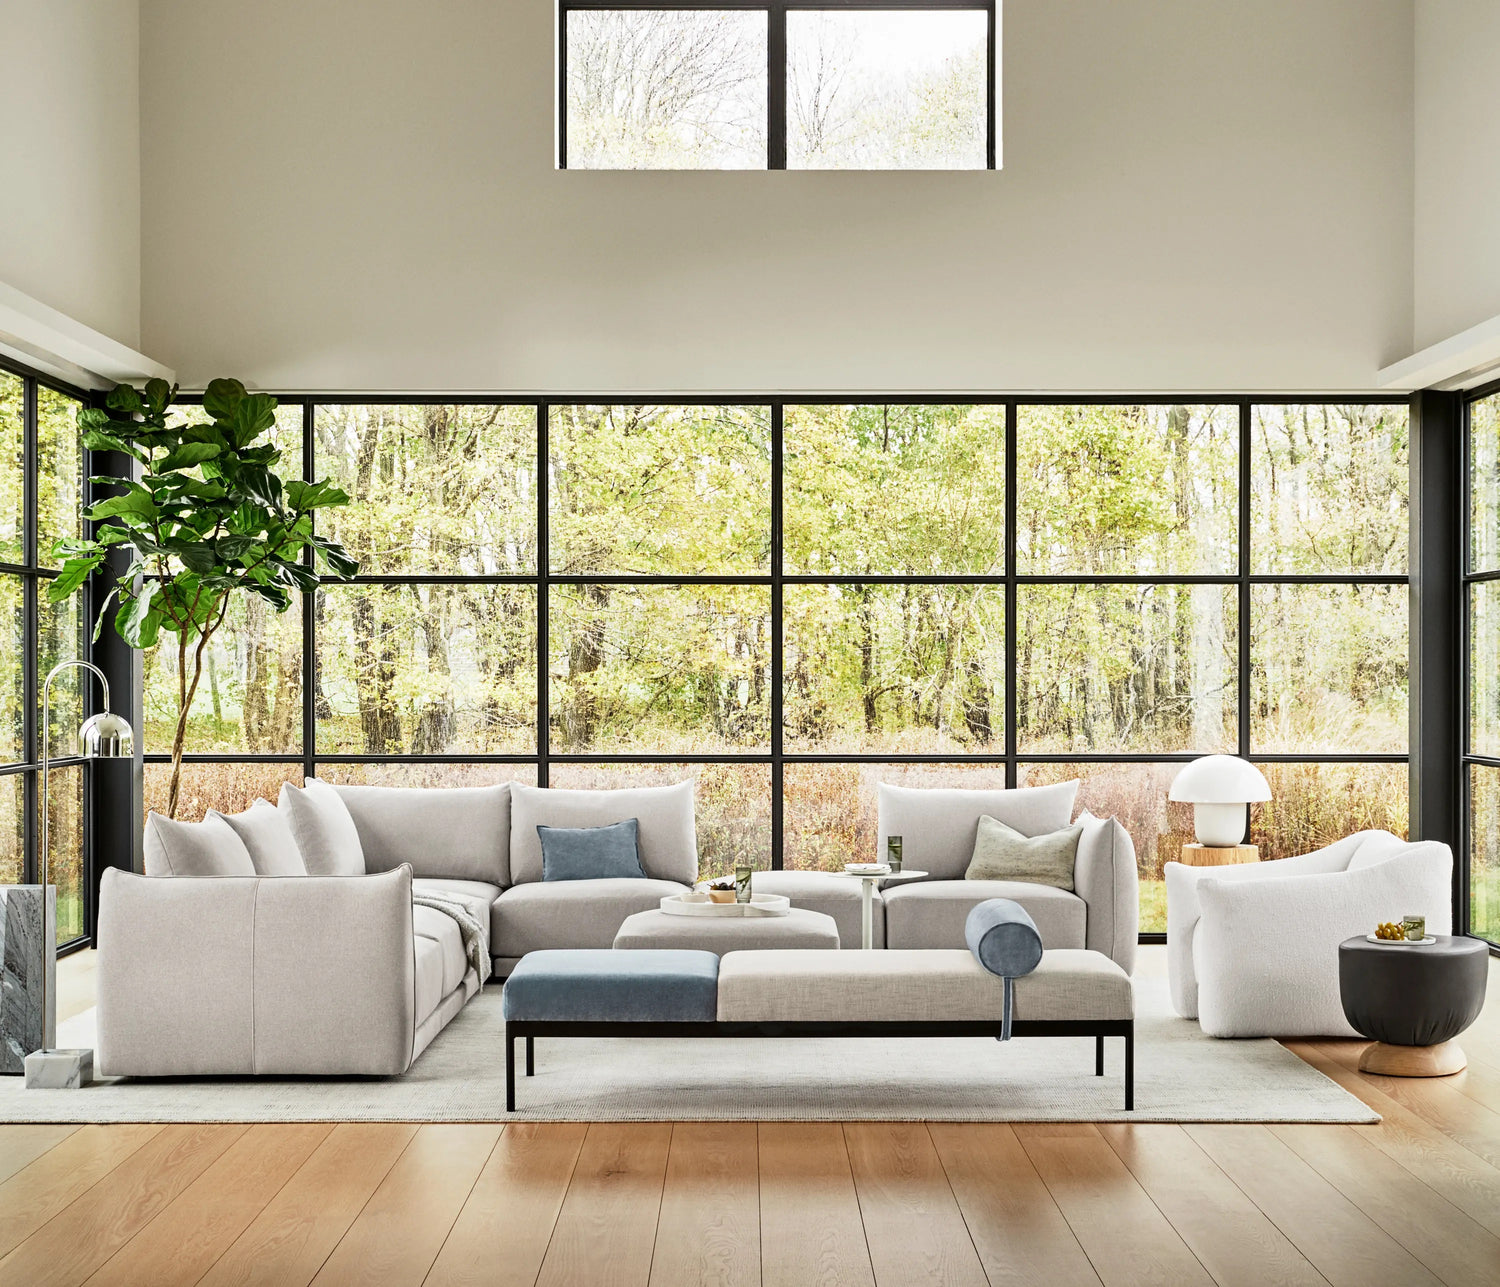 A modern living room with large floor-to-ceiling windows overlooking a wooded area. The space features light gray sofas, a white armchair, a cushioned bench, a round side table, a potted plant, and stylish decor pieces. There is a light-colored wooden floor.